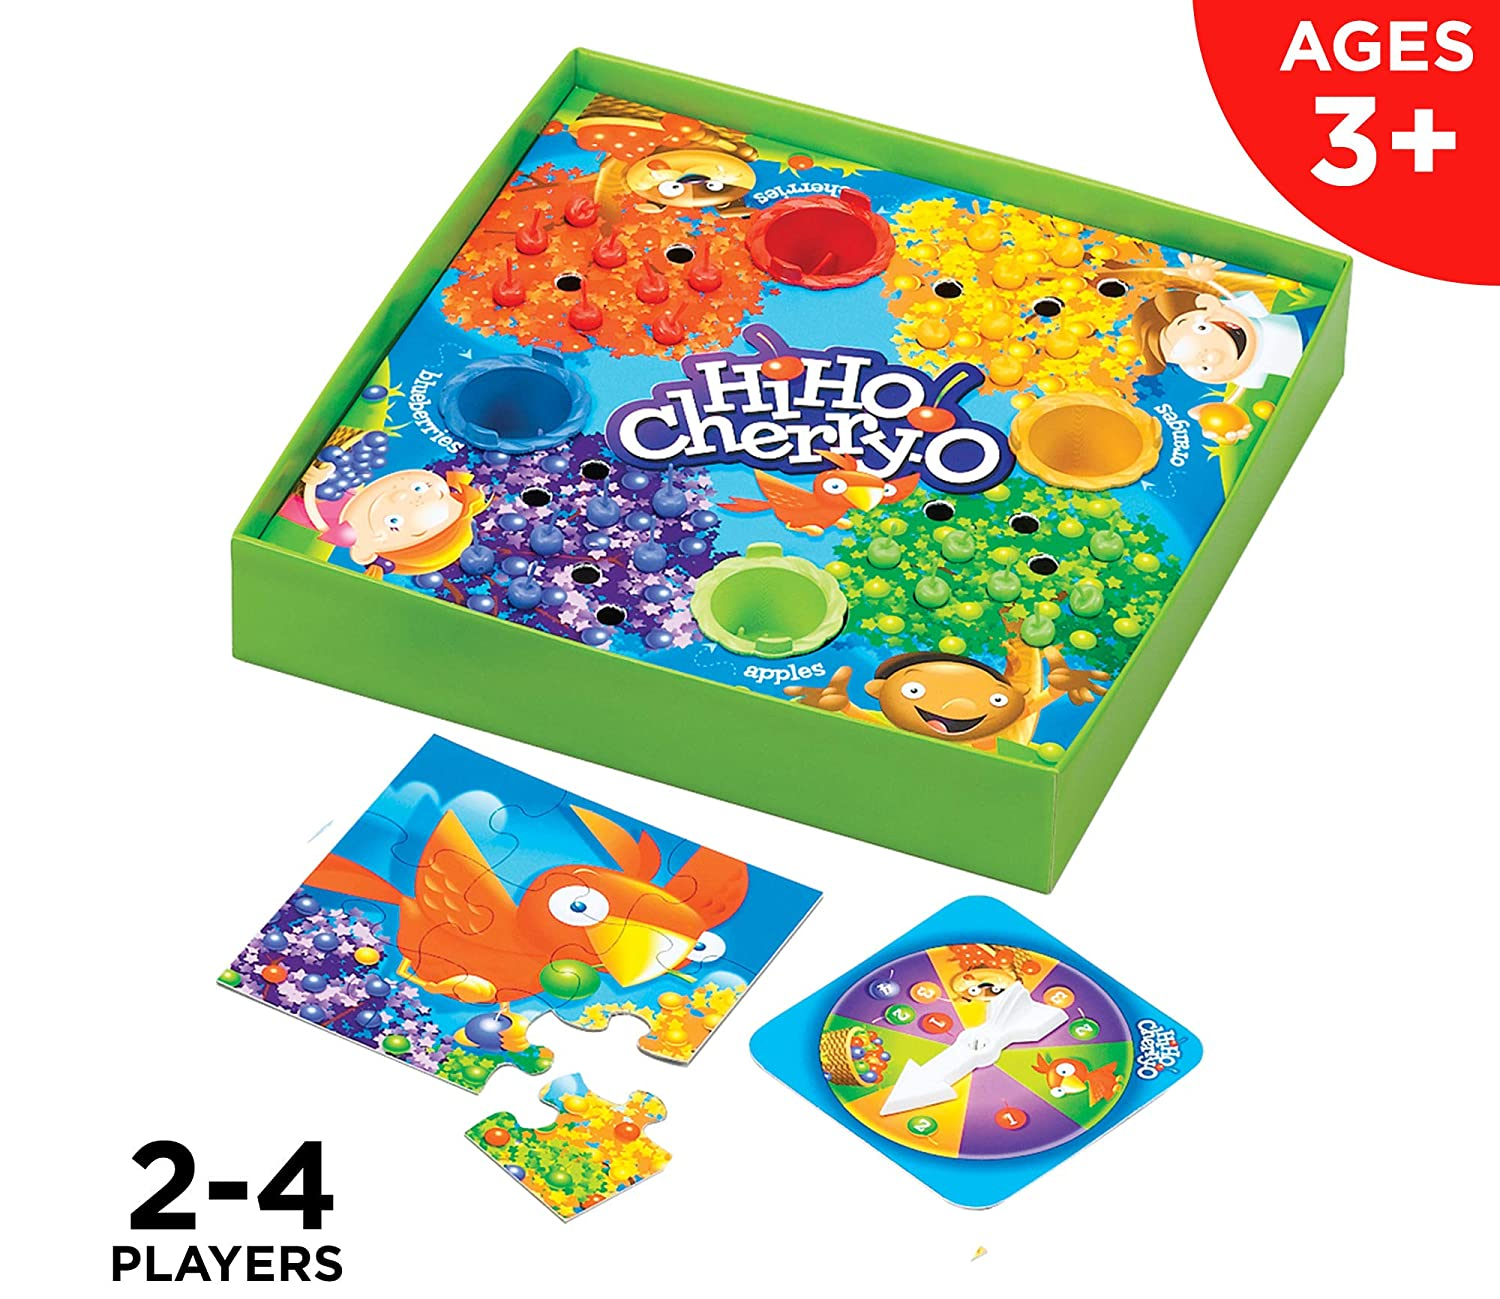 Green game board with illustrations of fruit, bird puzzle, and spinner